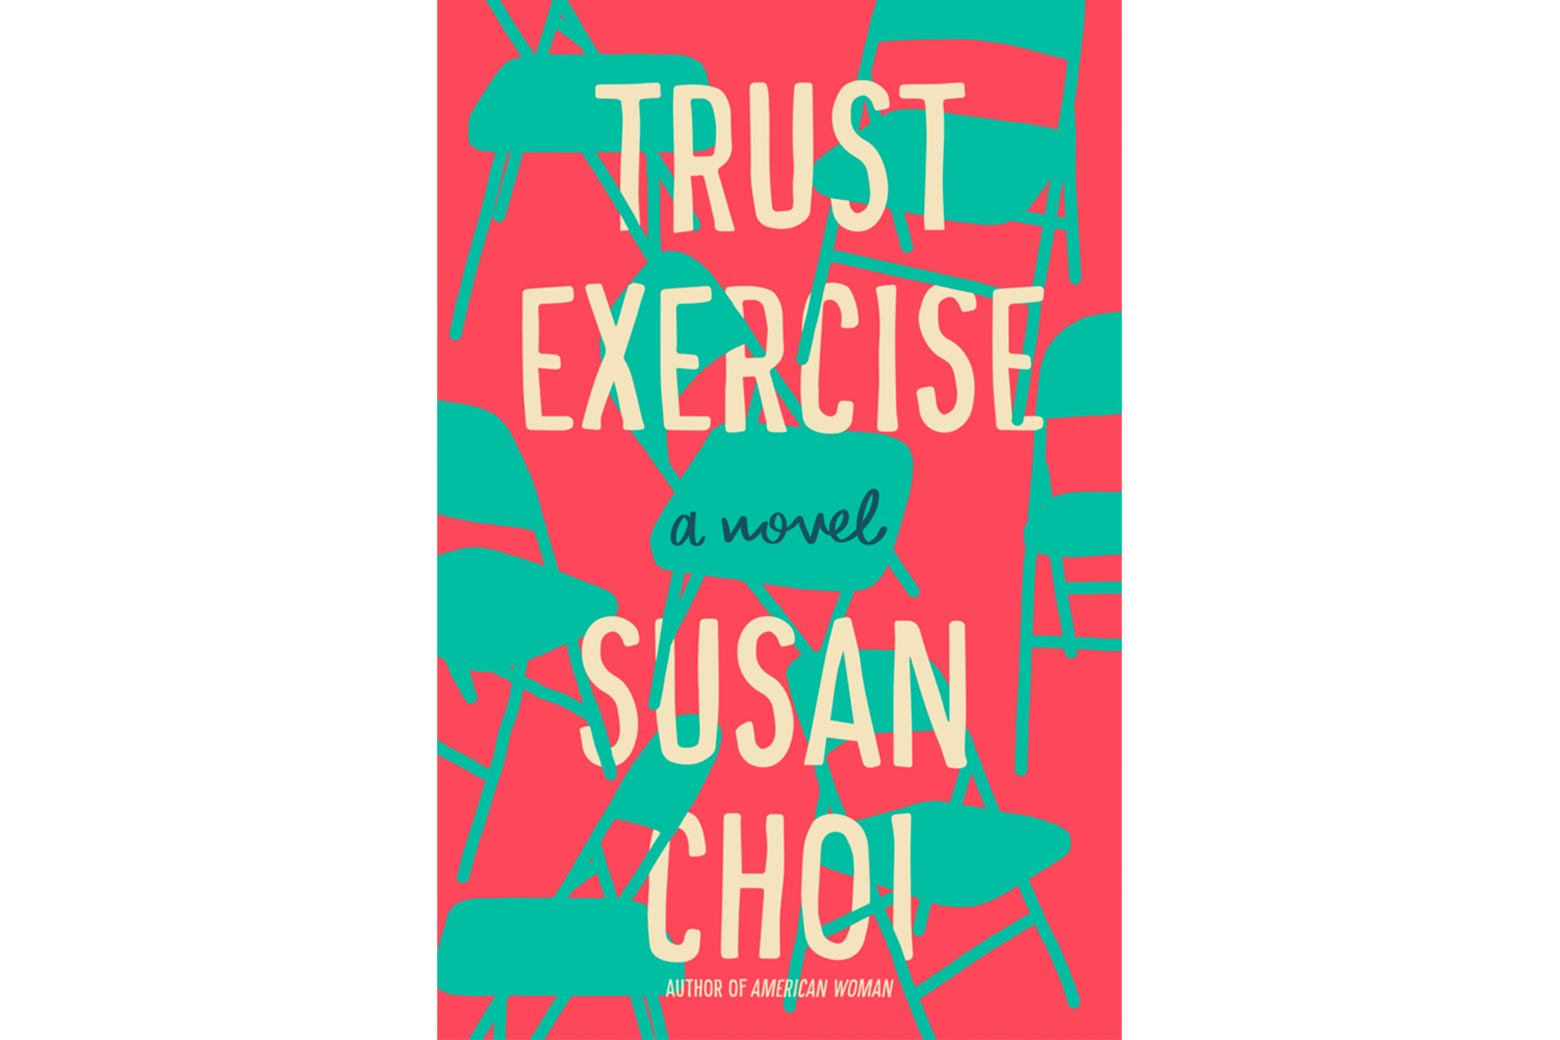 Trust Exercise book cover.